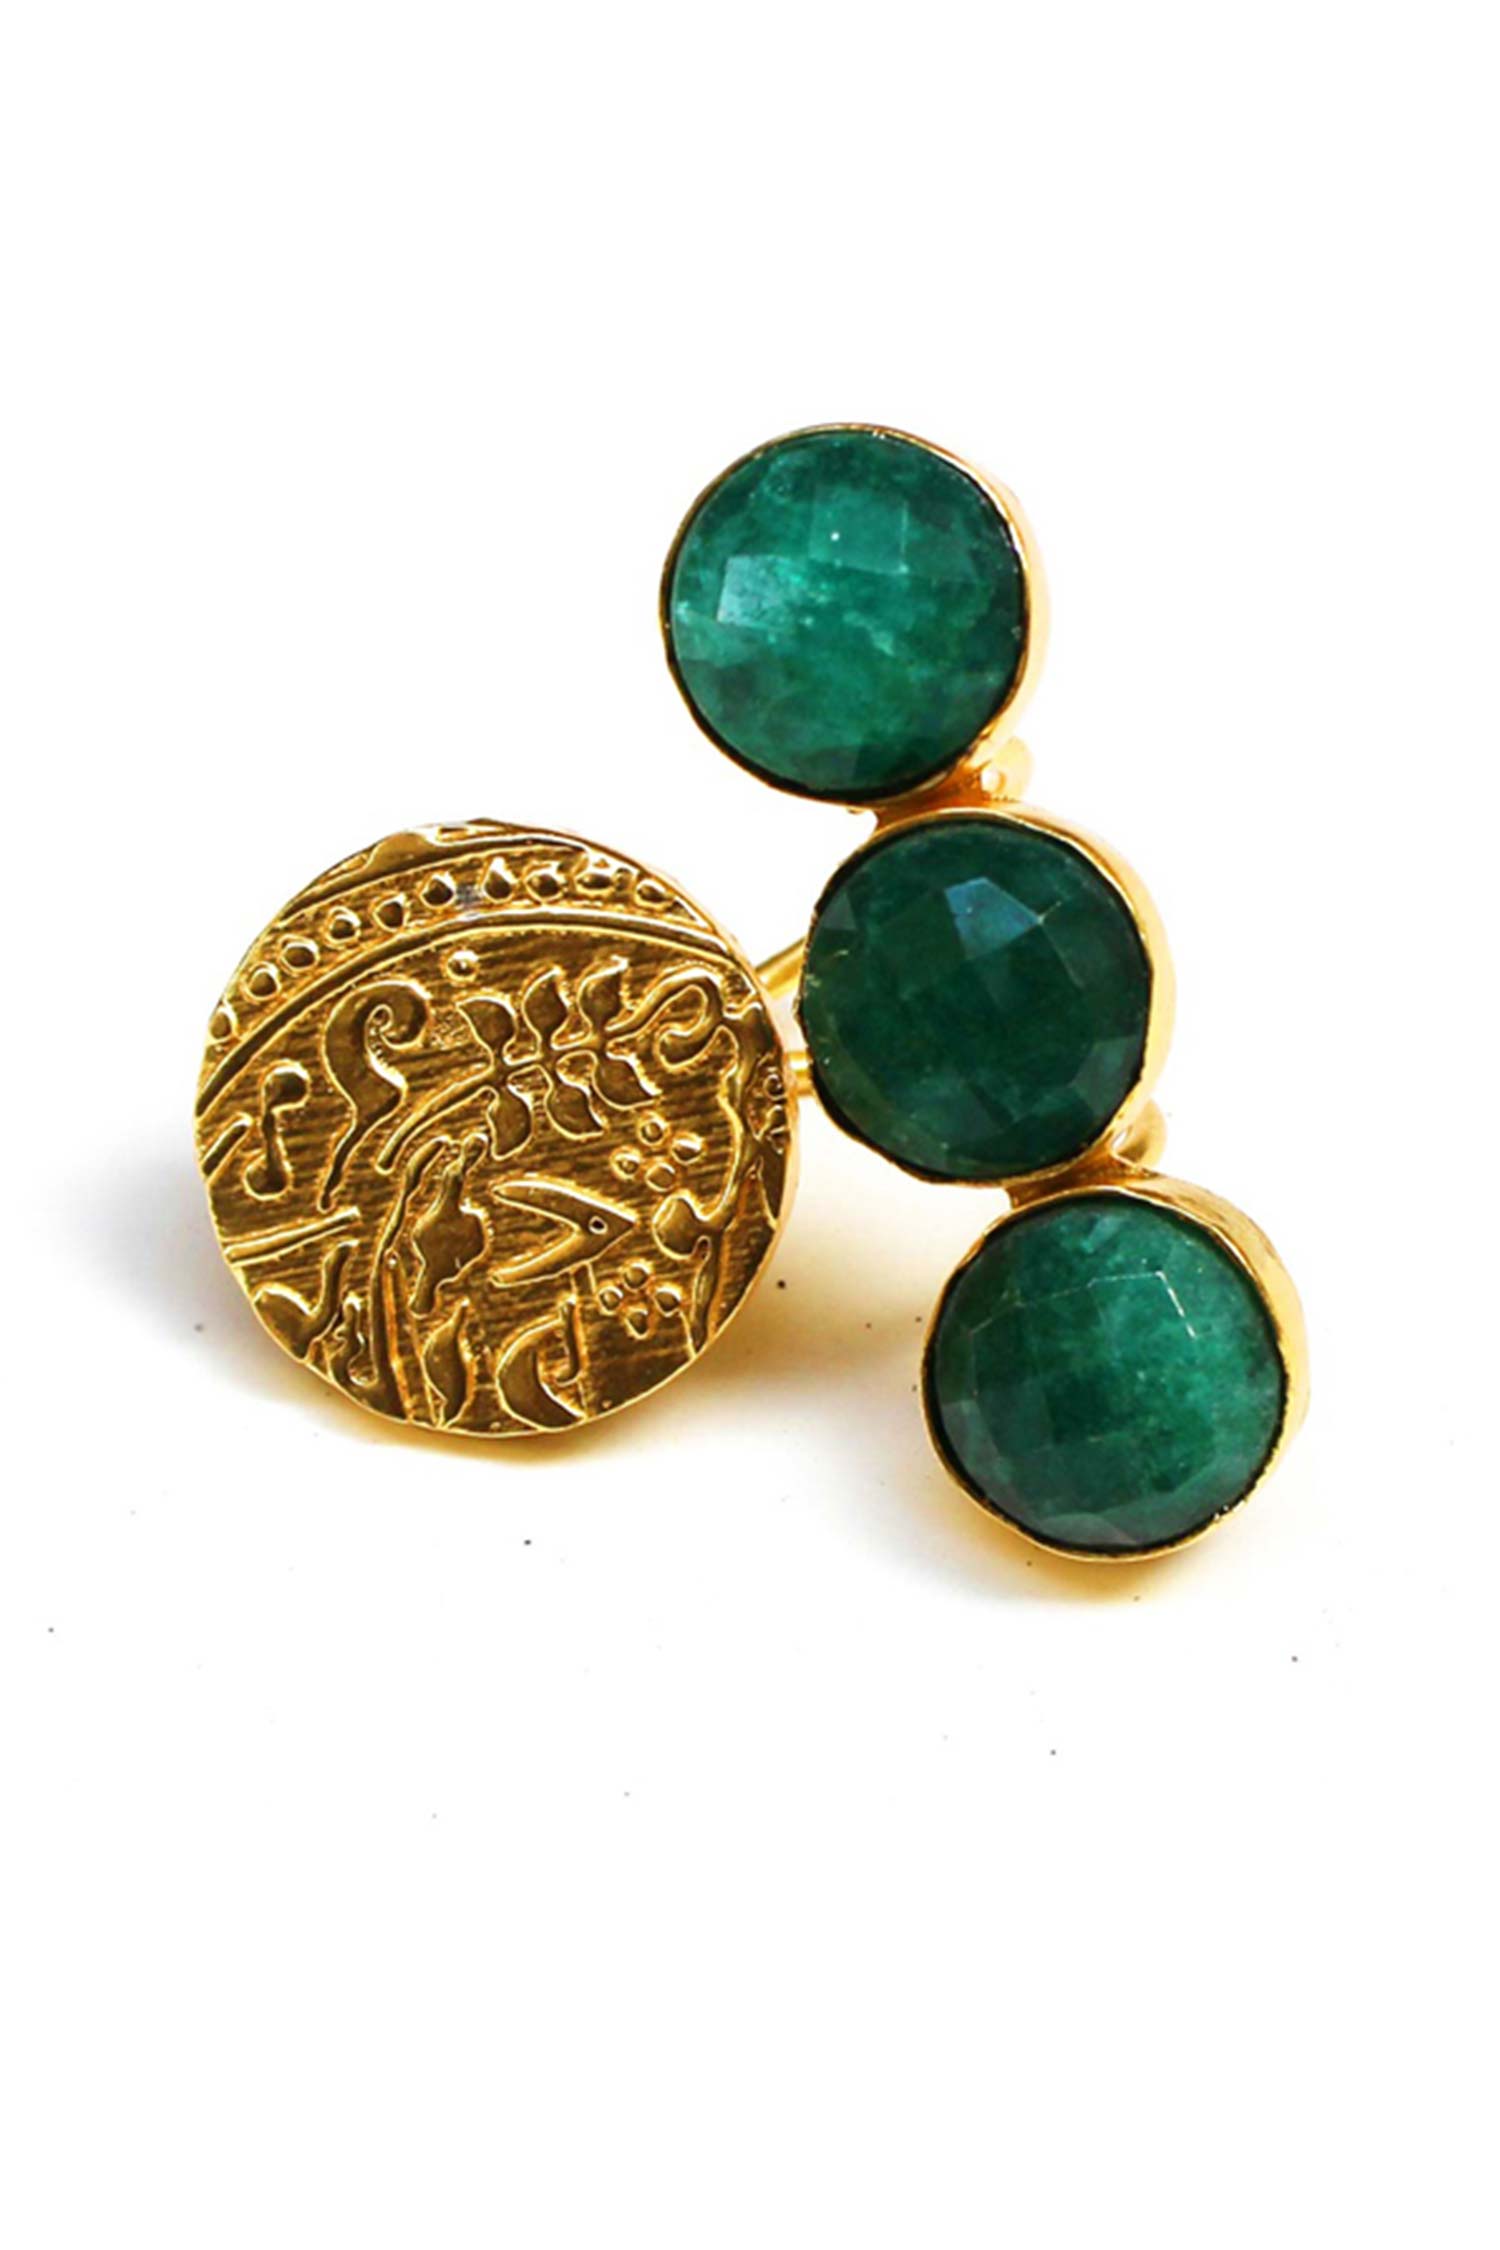 Vintage Coin Ring with Emerald Quartz